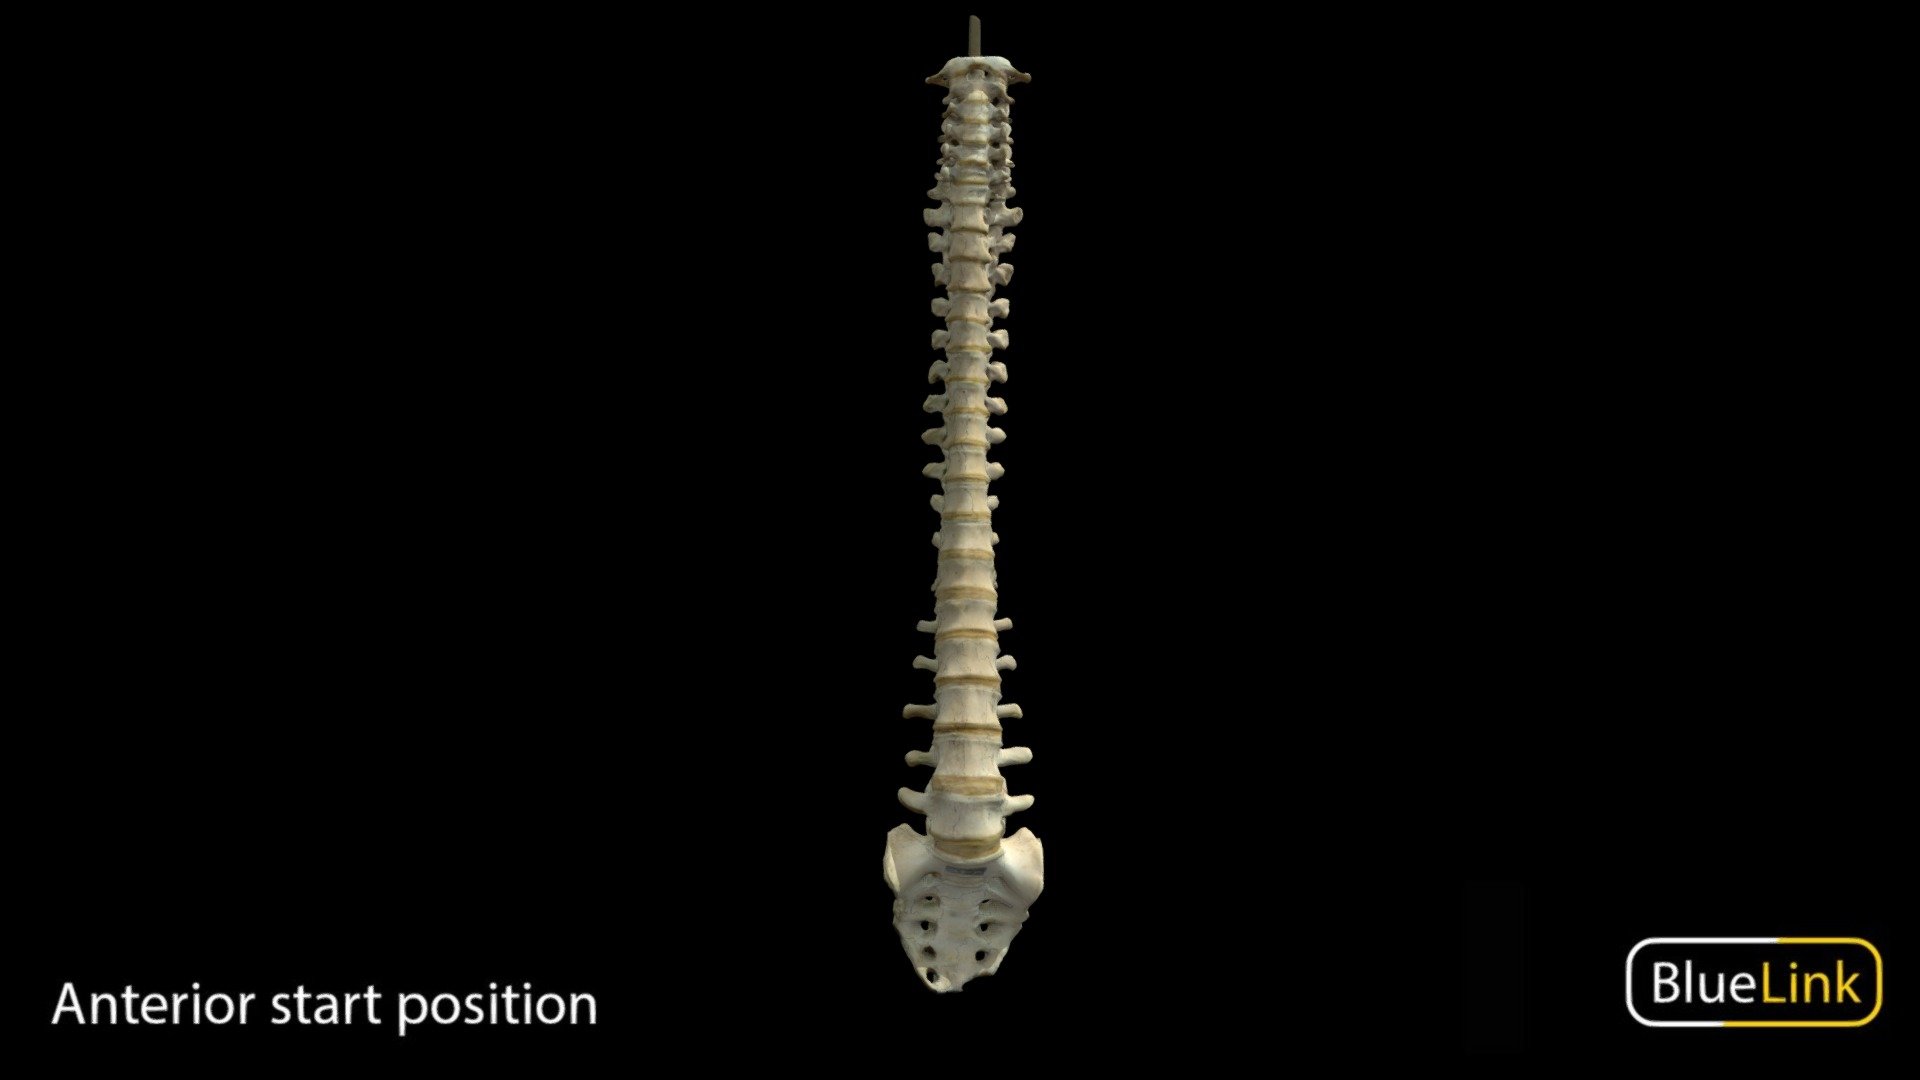 3D scan of a fixed, full spinal column

Captured with Einscan Pro

Captured and edited by: Will Gribbin

Copyright2019 BK Alsup &amp; GM Fox - Spinal Column - 3D model by Bluelink Anatomy - University of Michigan (@bluelinkanatomy) 3d model